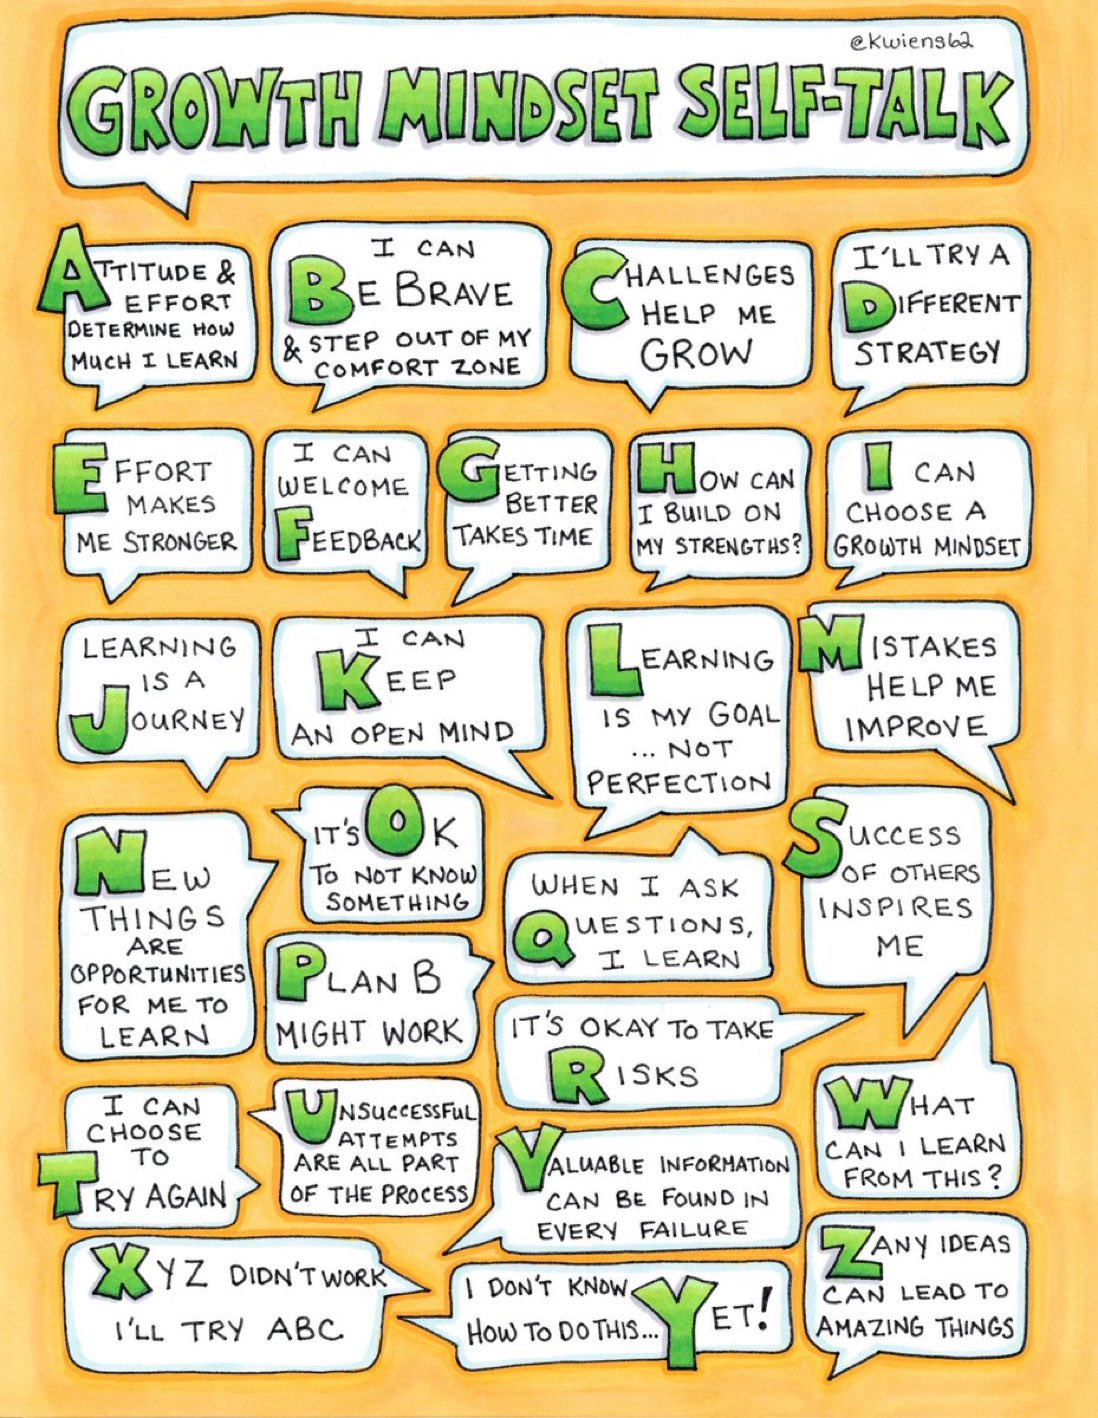 The ABC's of Growth Mindset